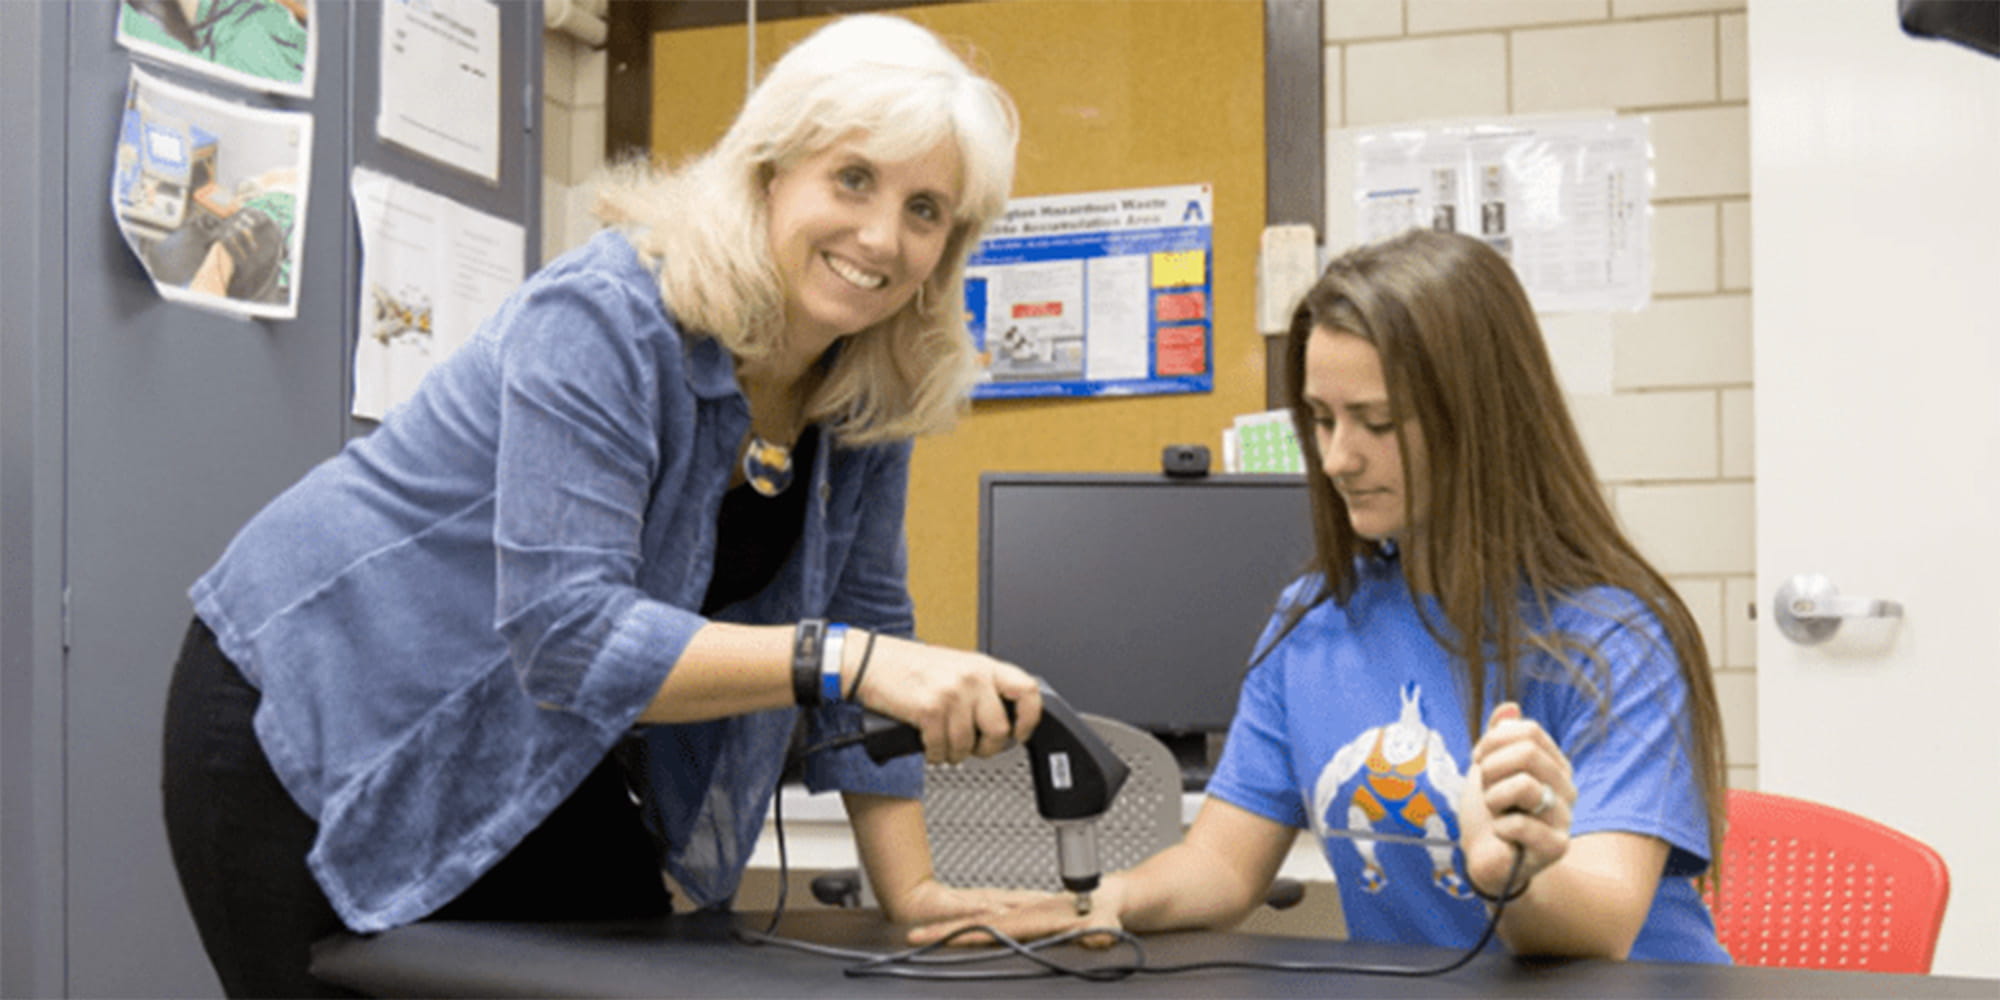 Cindy Trowbridge demonstrates an athletic training technique on a student volunteer." _languageinserted="true